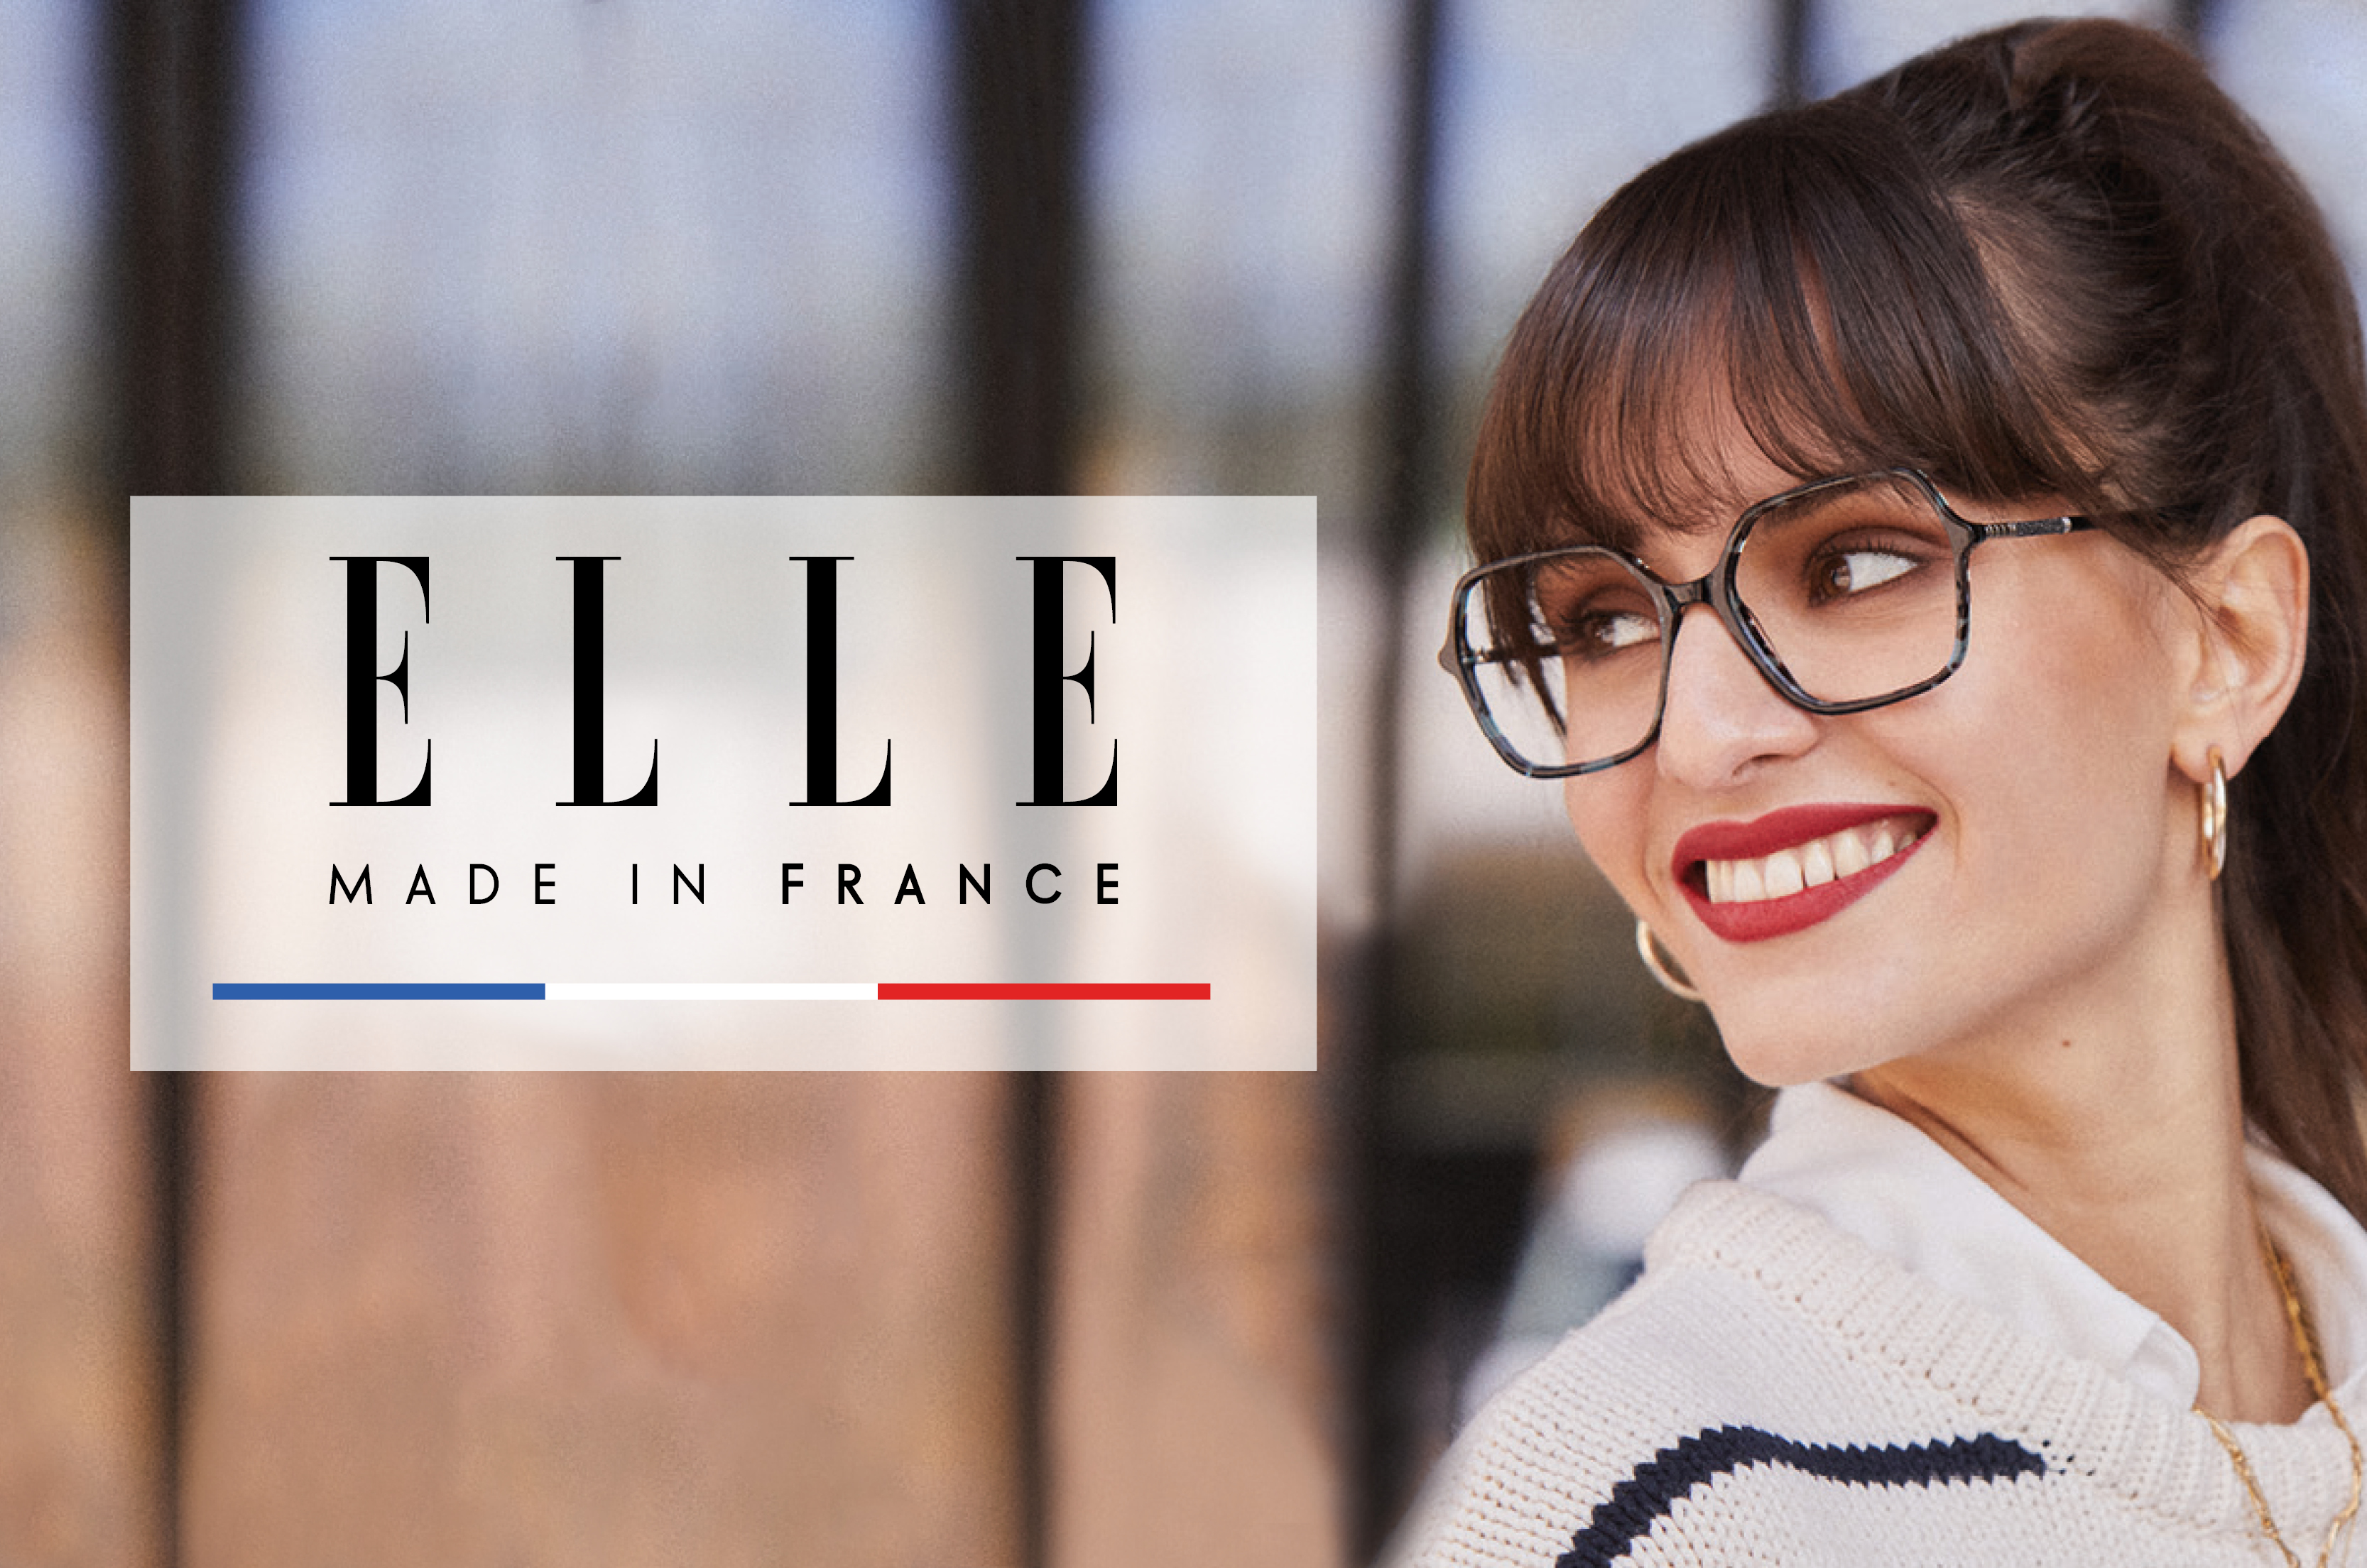 Elle made in France collection out now